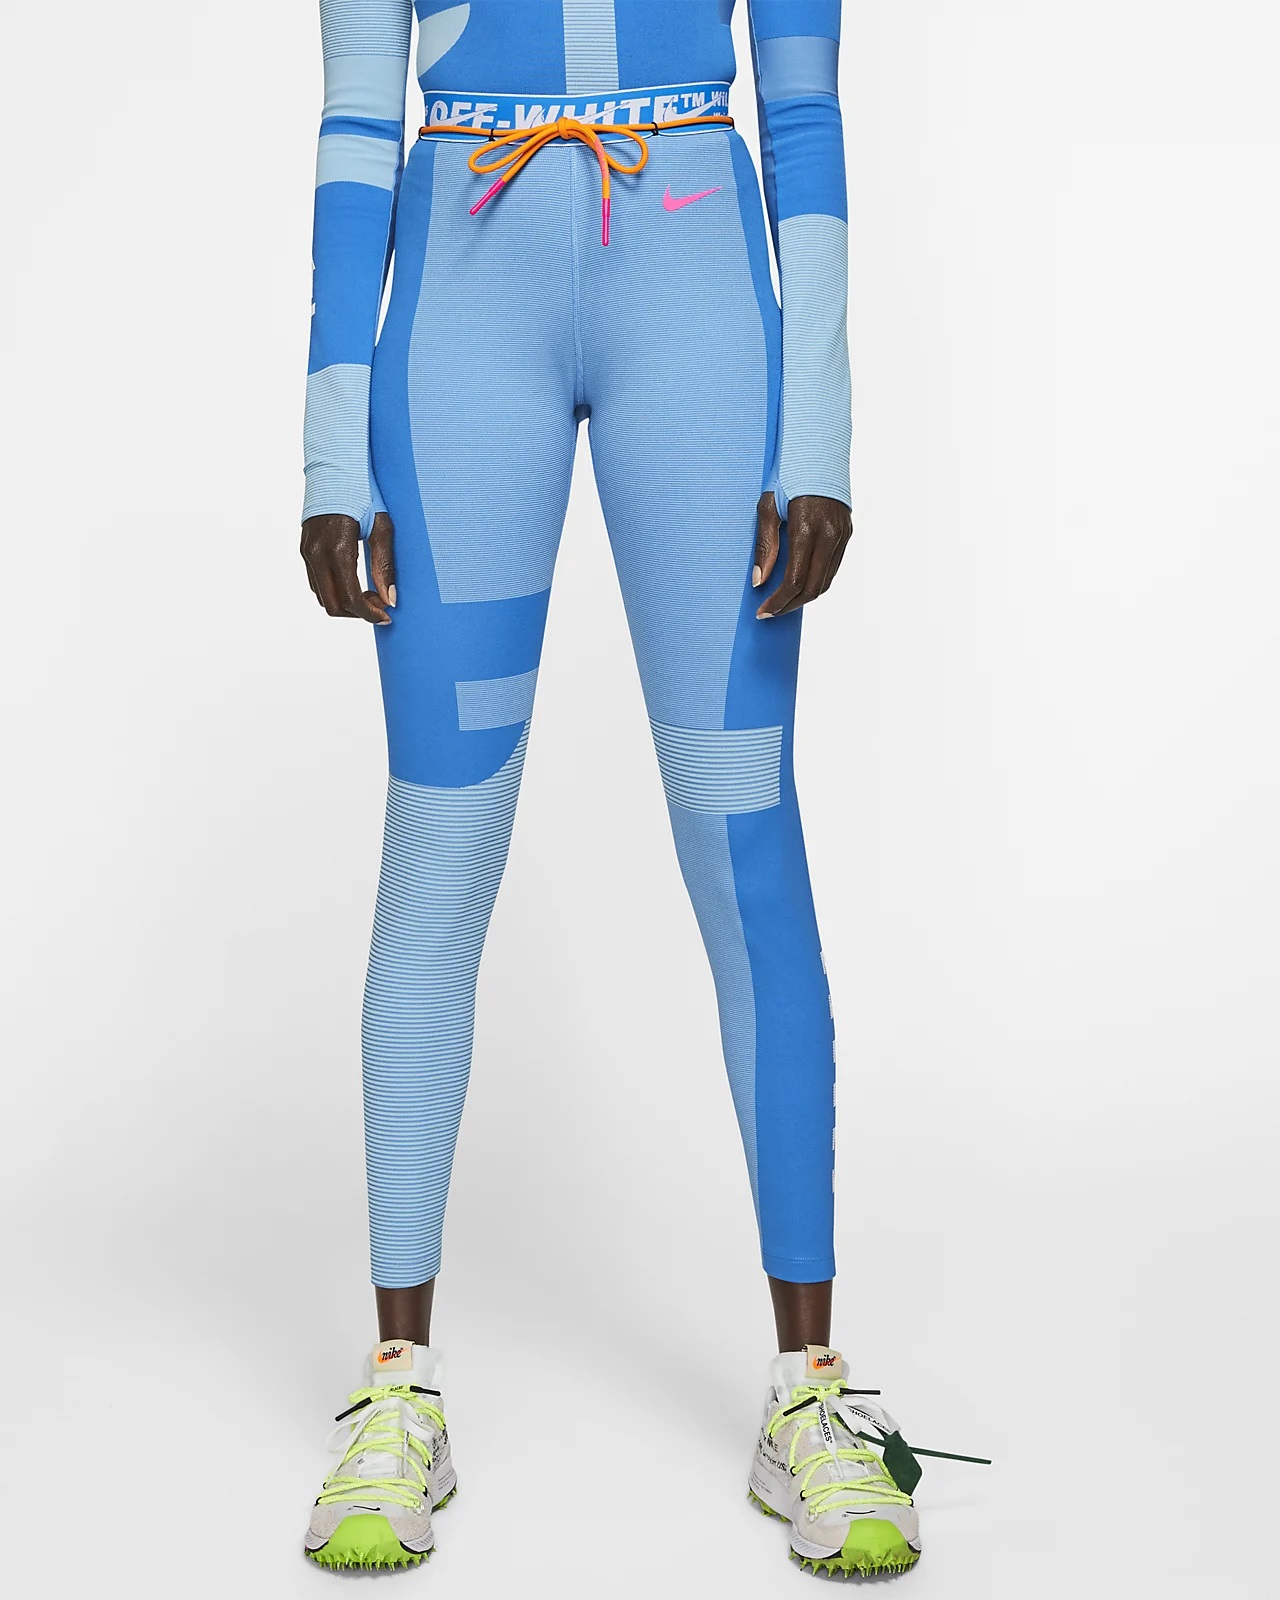 Nike And Off-White Release 'Athlete In Progress' Tights And Top